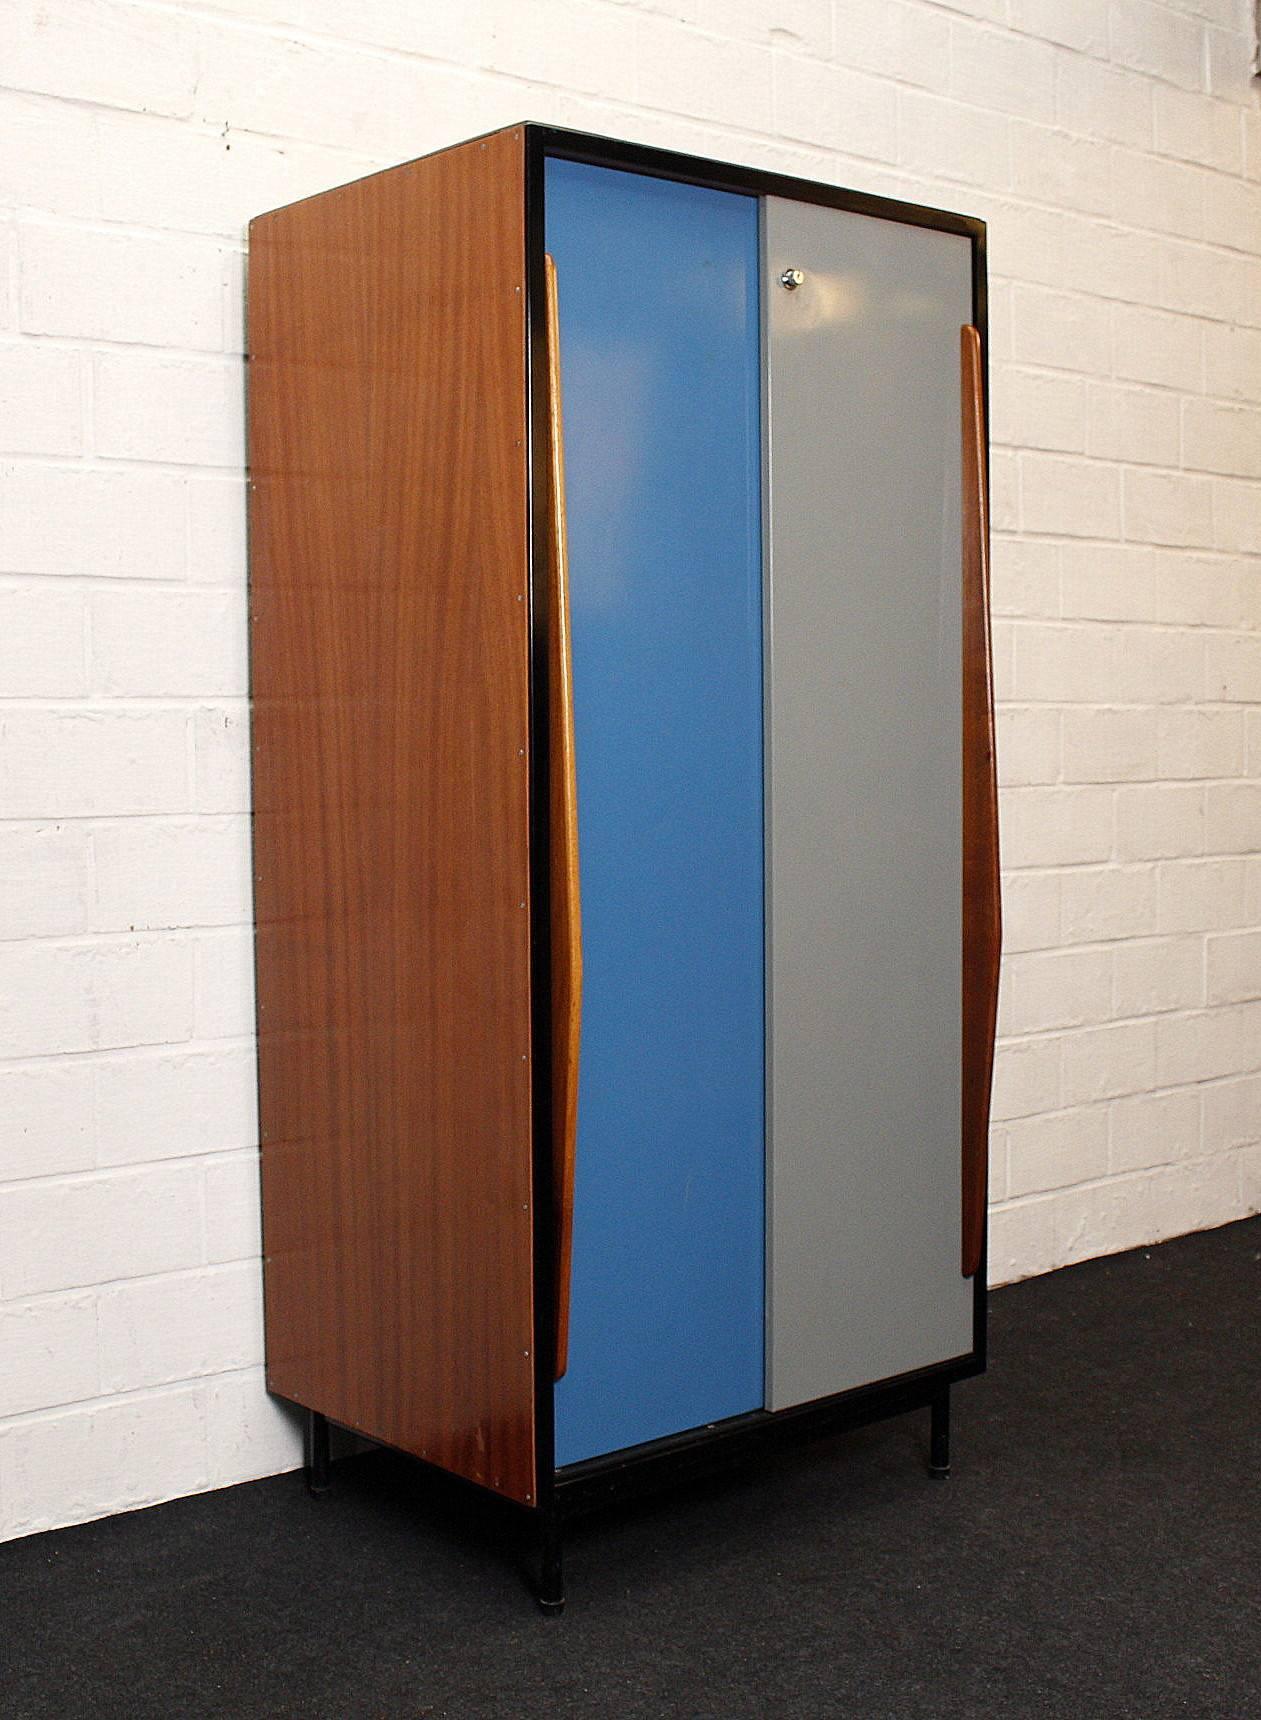 Wardrobe by designer Willy Van Der Meeren for Tubax.
Is made of colored gray and blue metal doors and wooden handles.
Is in very good vintage. Only a small professional restoration bottom left (see picture).

Van Der Meeren is considered one of